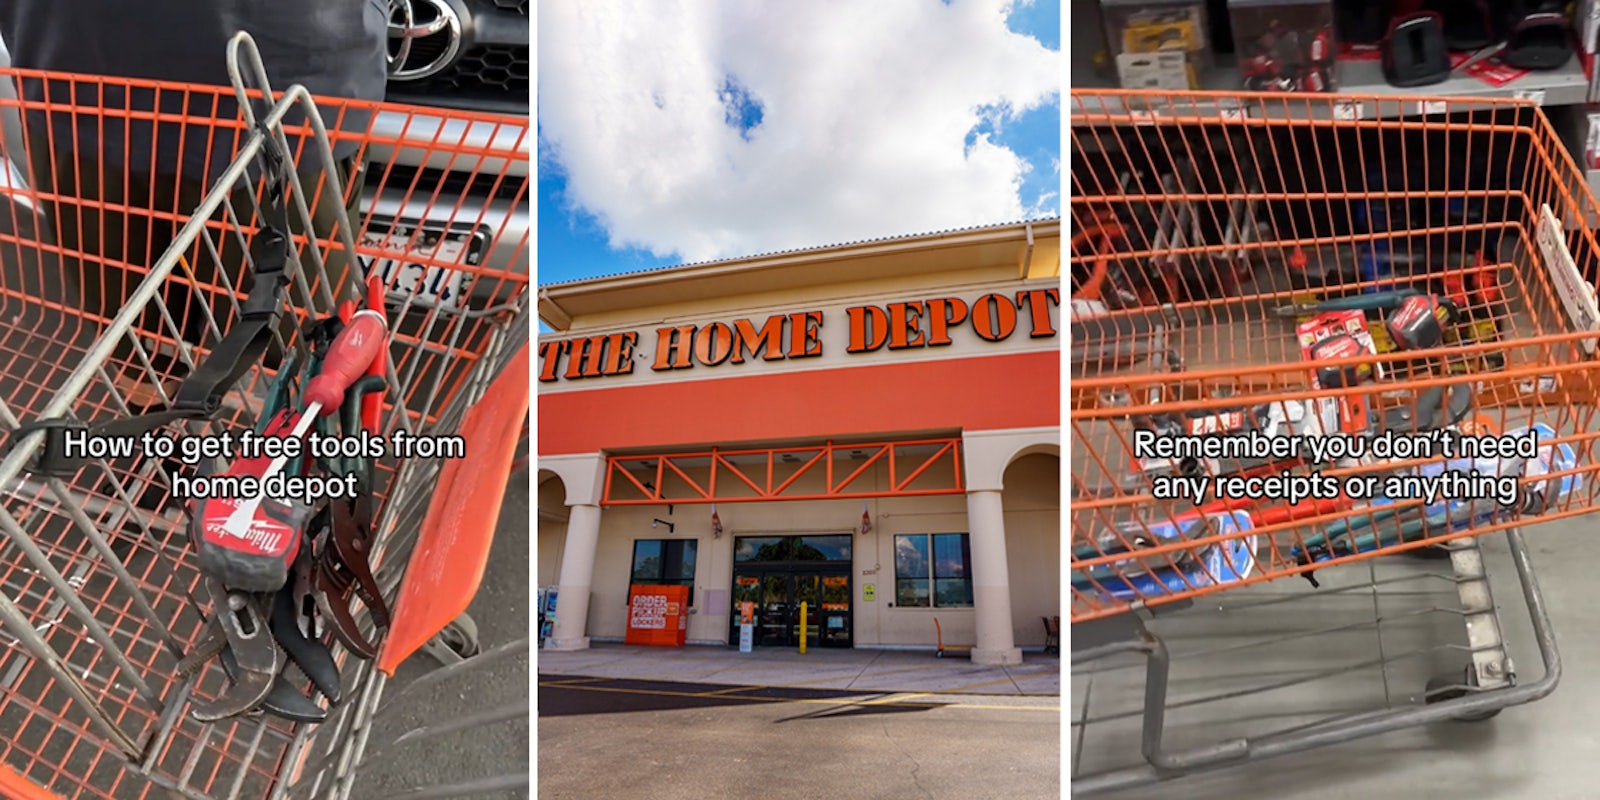 Home Depot shopping cart with tools with caption 'How to get free tools from home depot' (l) The Home Depot building with sign (c) Home Depot shopping cart with tools with caption 'Remember you don't need any receipts or anything' (r)